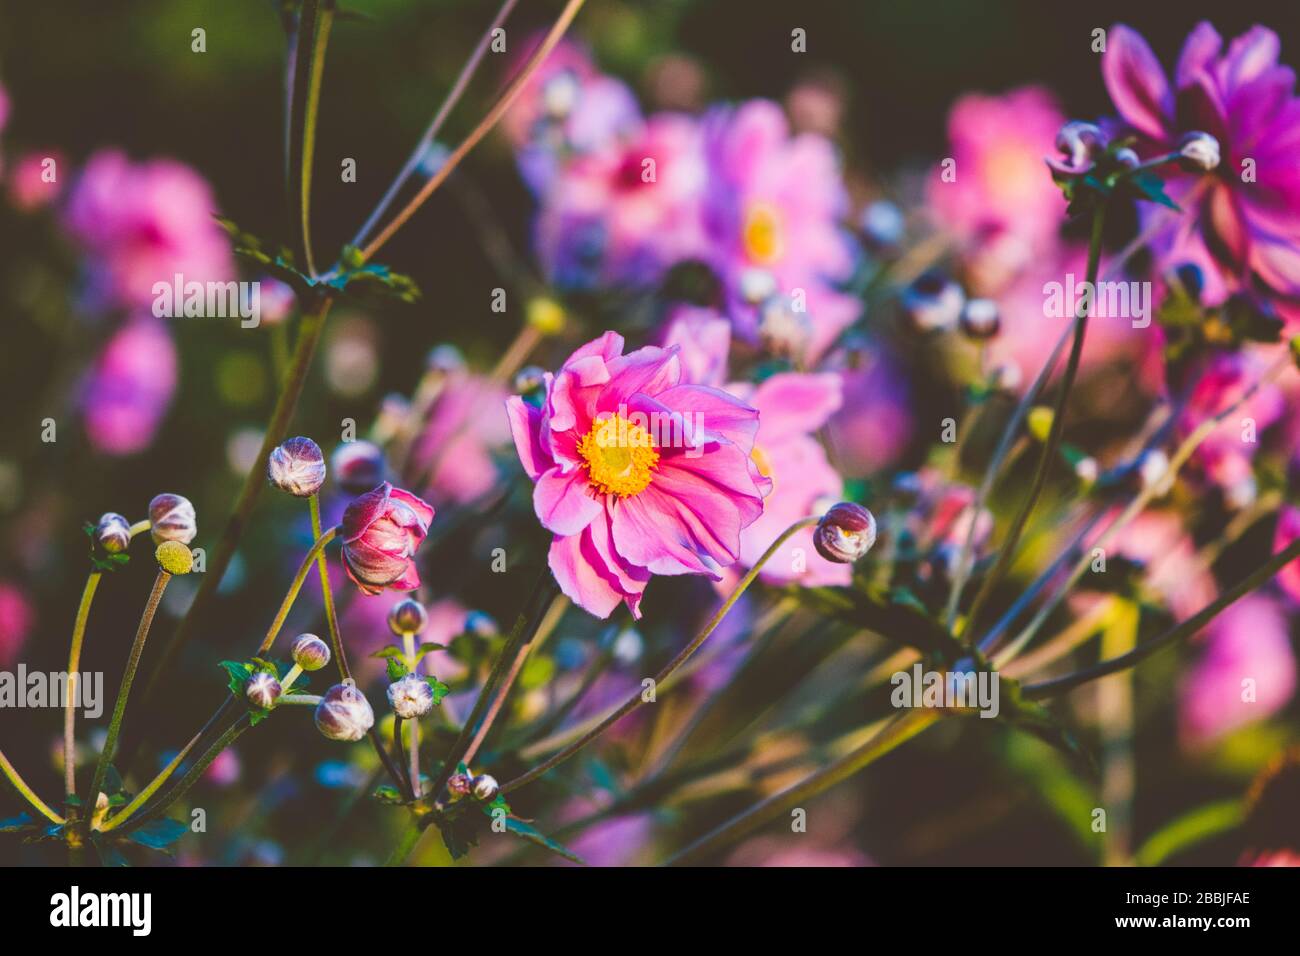 Pink Anemone Flowers in a Garden at Sunset Stock Photo